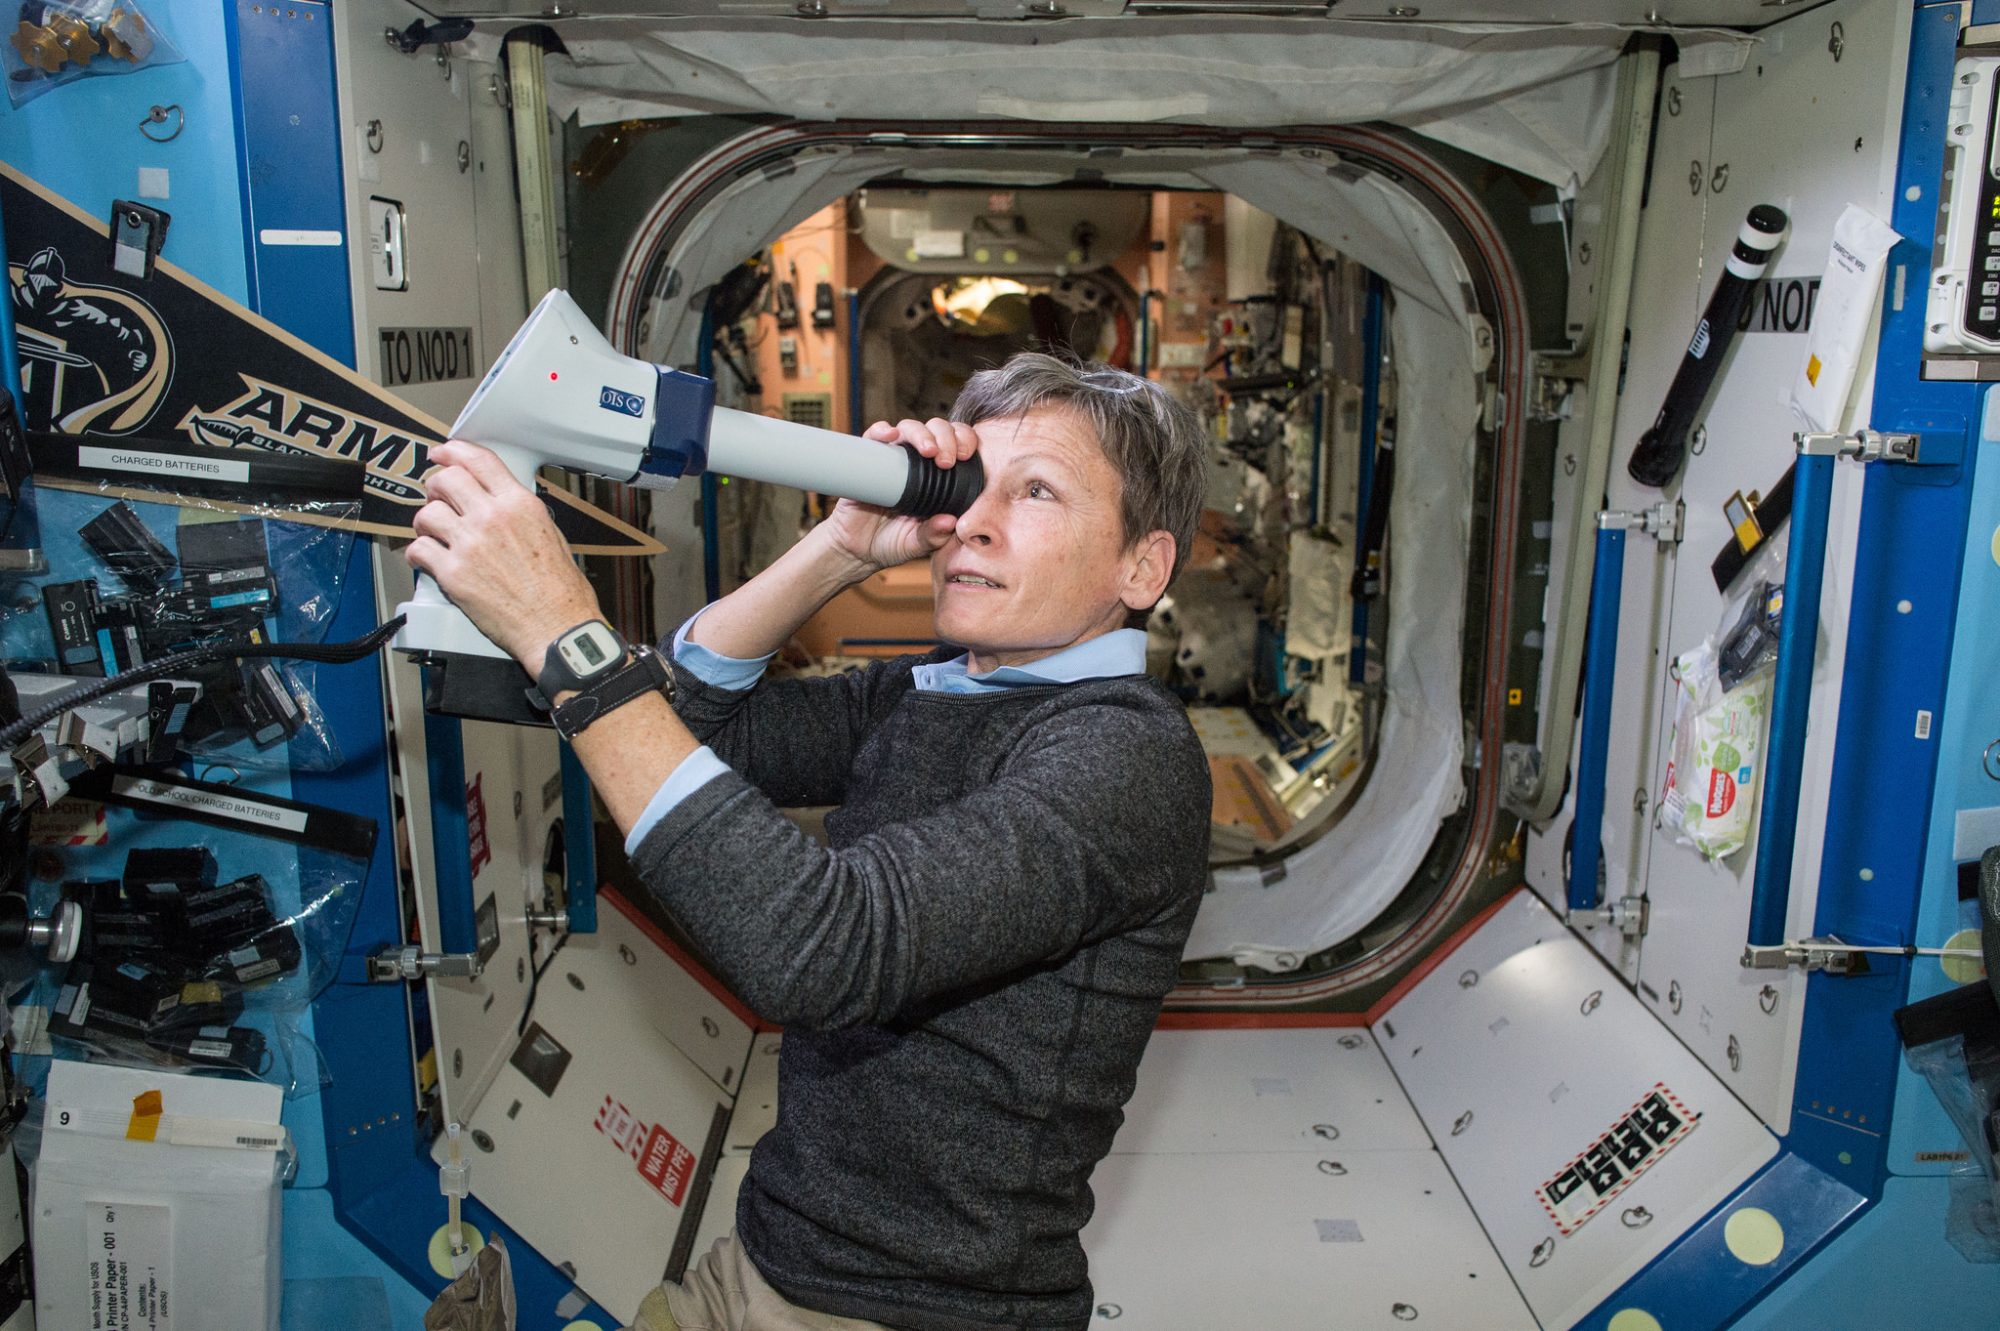 Astronaut Peggy Whitson Breaks Record After Record